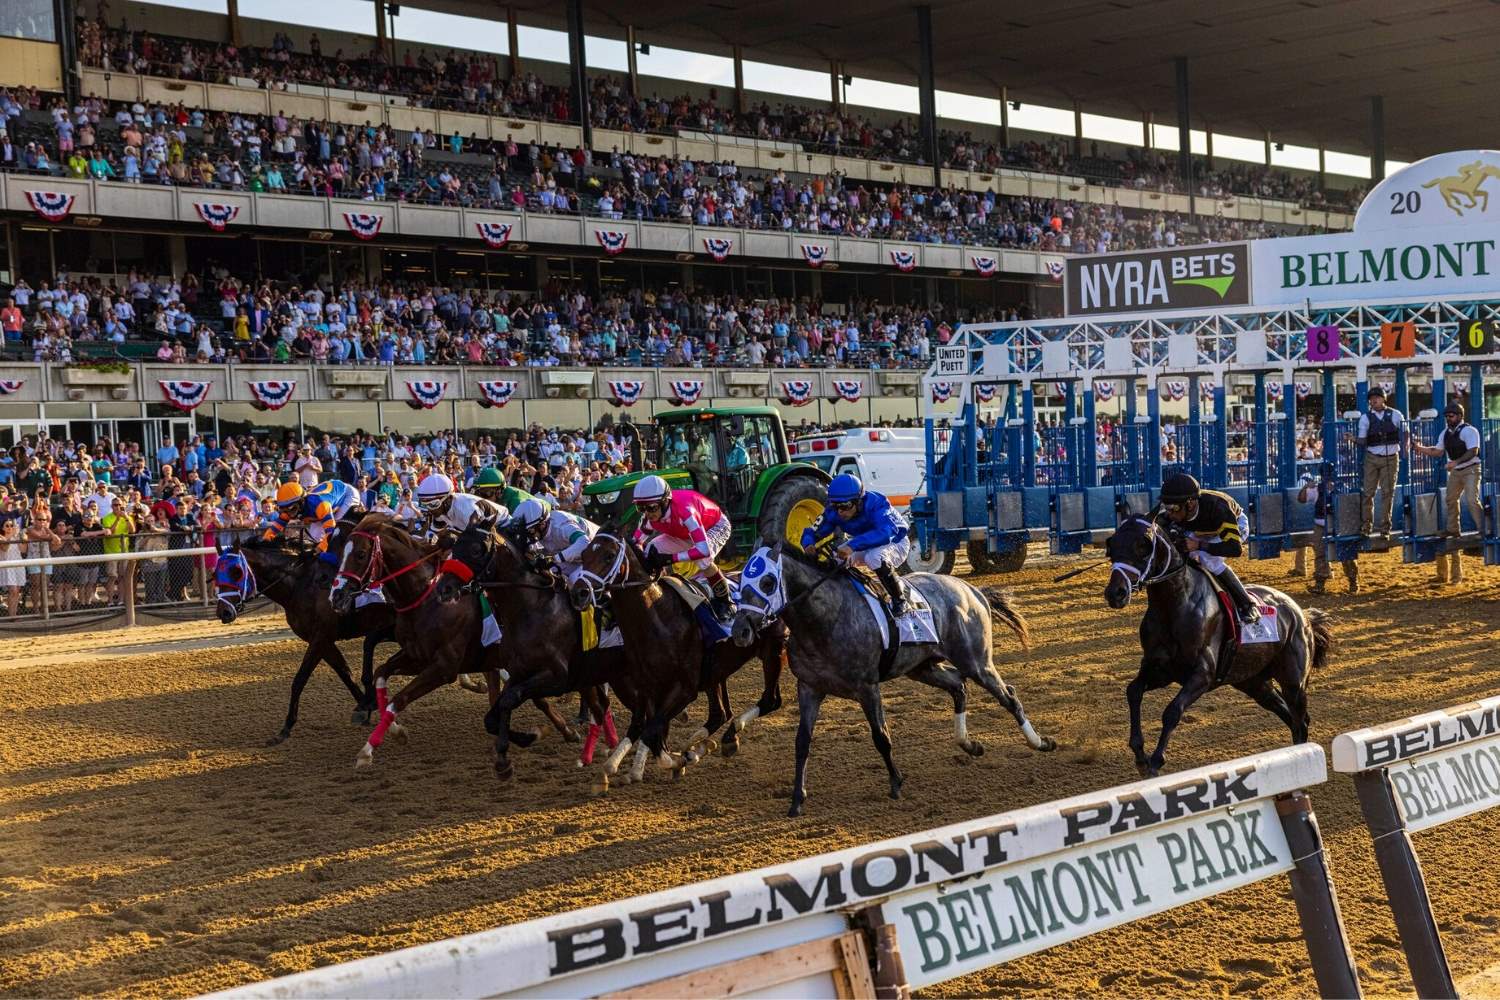 The Unbelievable Speed That Shattered Records At The Belmont Stakes!